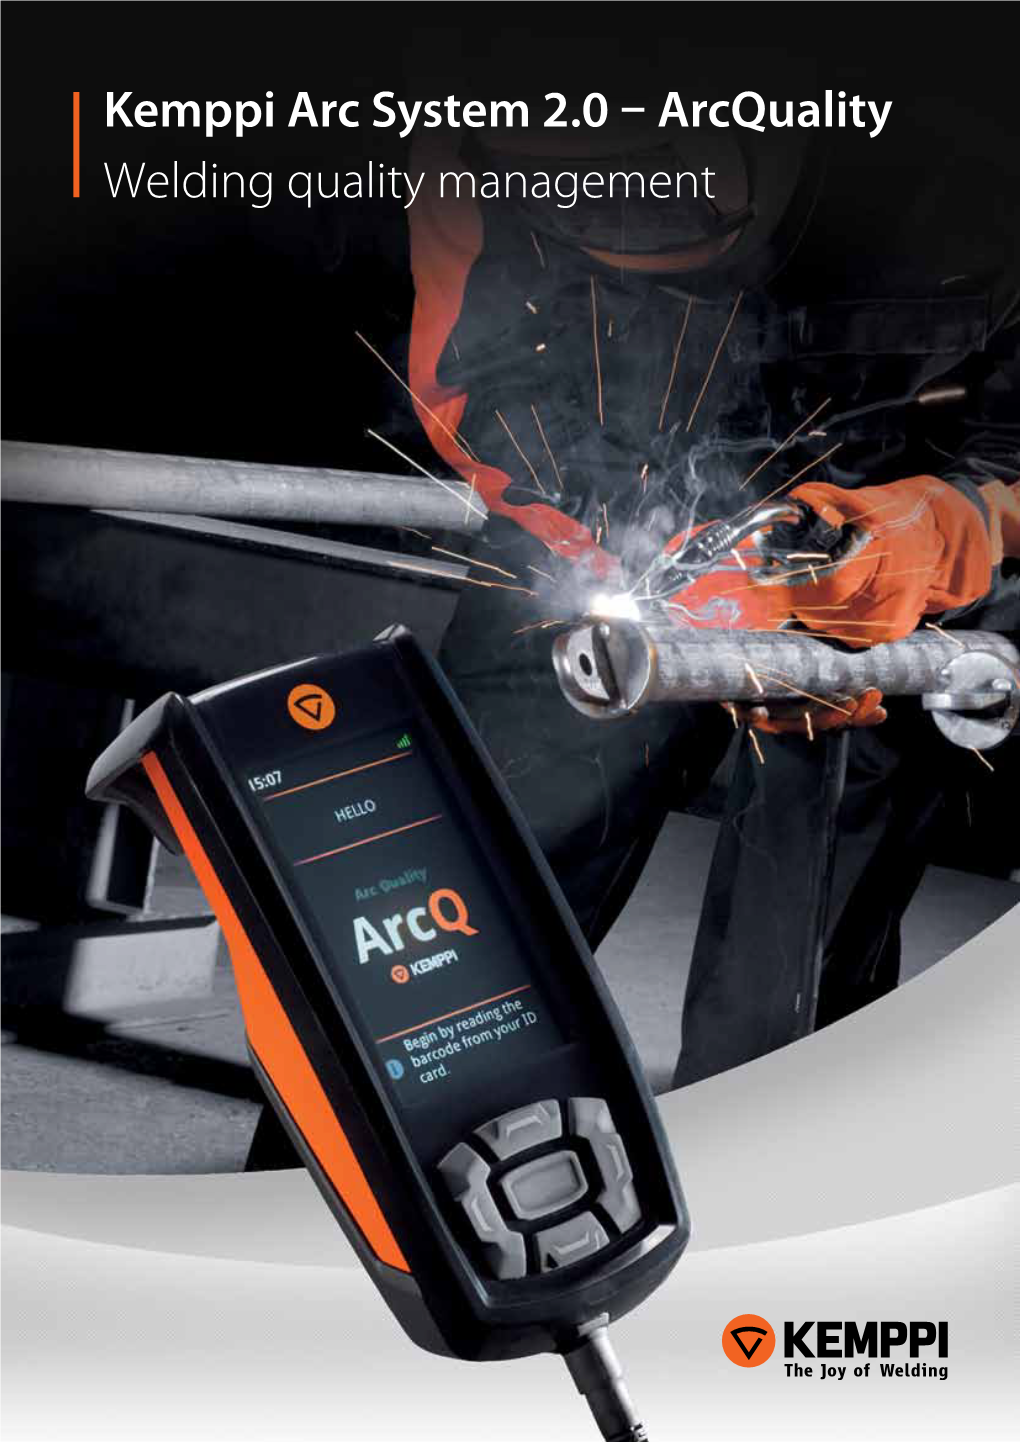 Kemppi Arc System 2.0 – Arcquality Welding Quality Management How Much Do We Really Know About the Quality of Welded Objects?